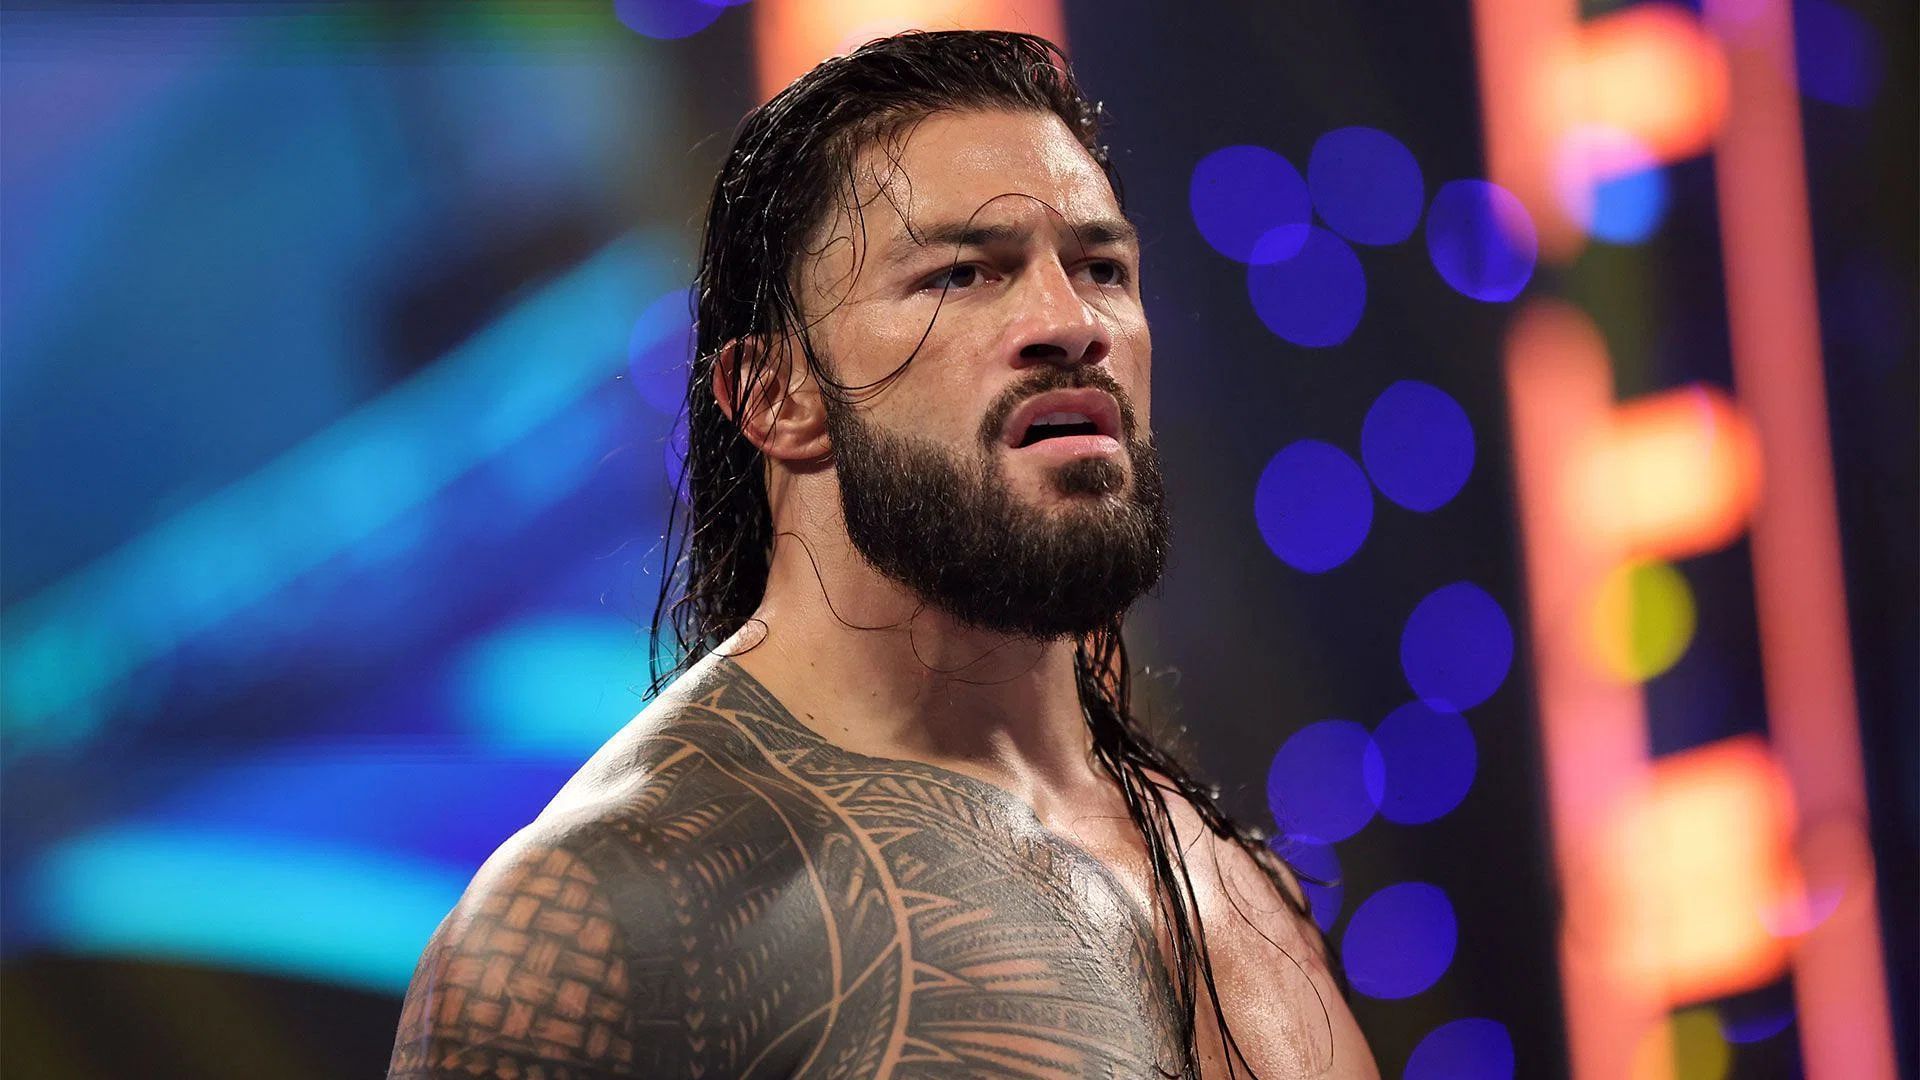 Roman Reigns could be taken off WWE TV again